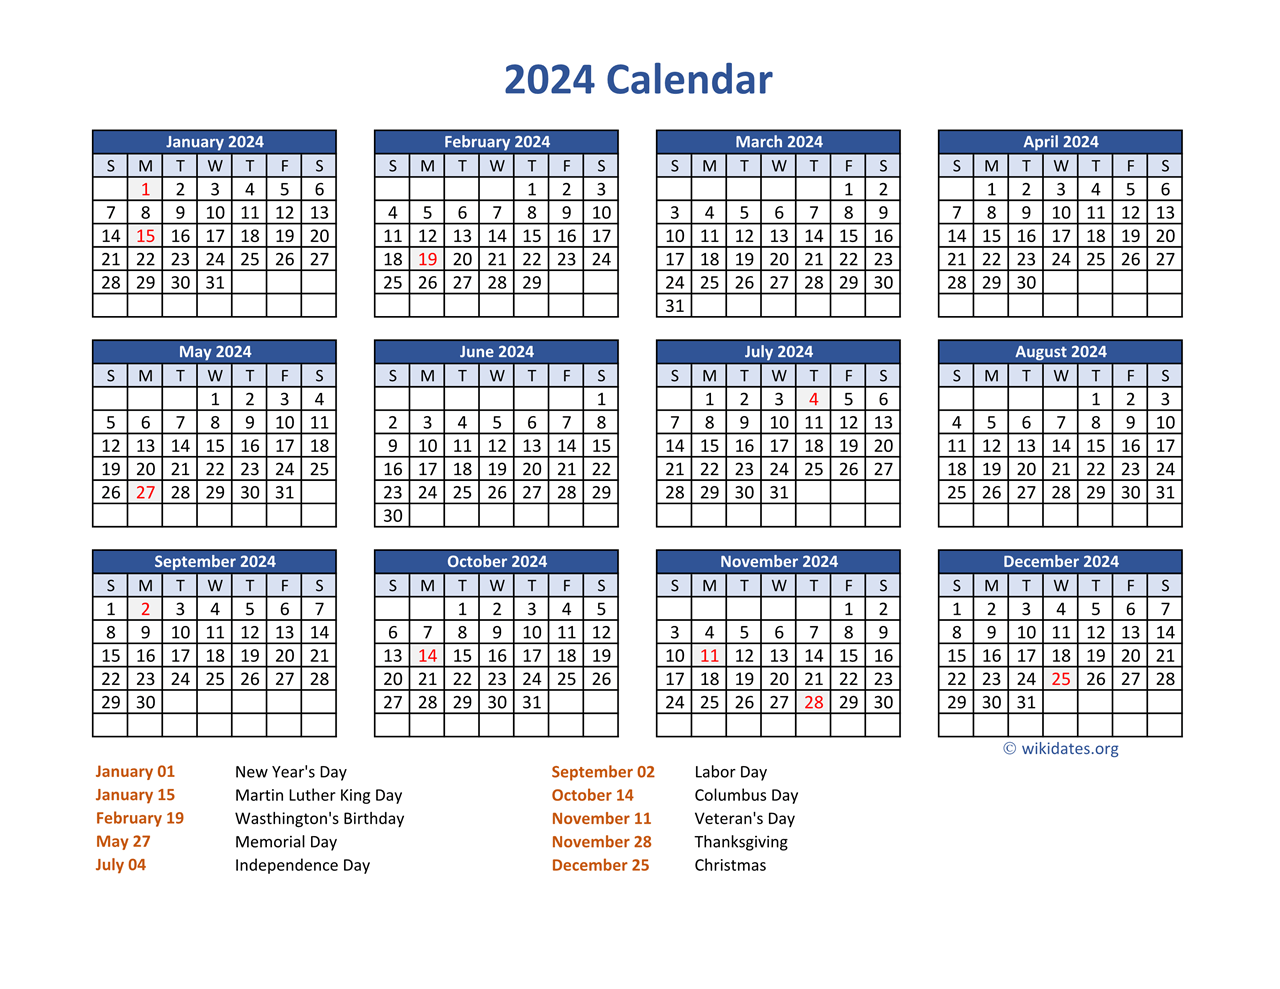 Pdf Calendar 2024 With Federal Holidays | Wikidates for 2024 Calendar With Us Holidays Printable